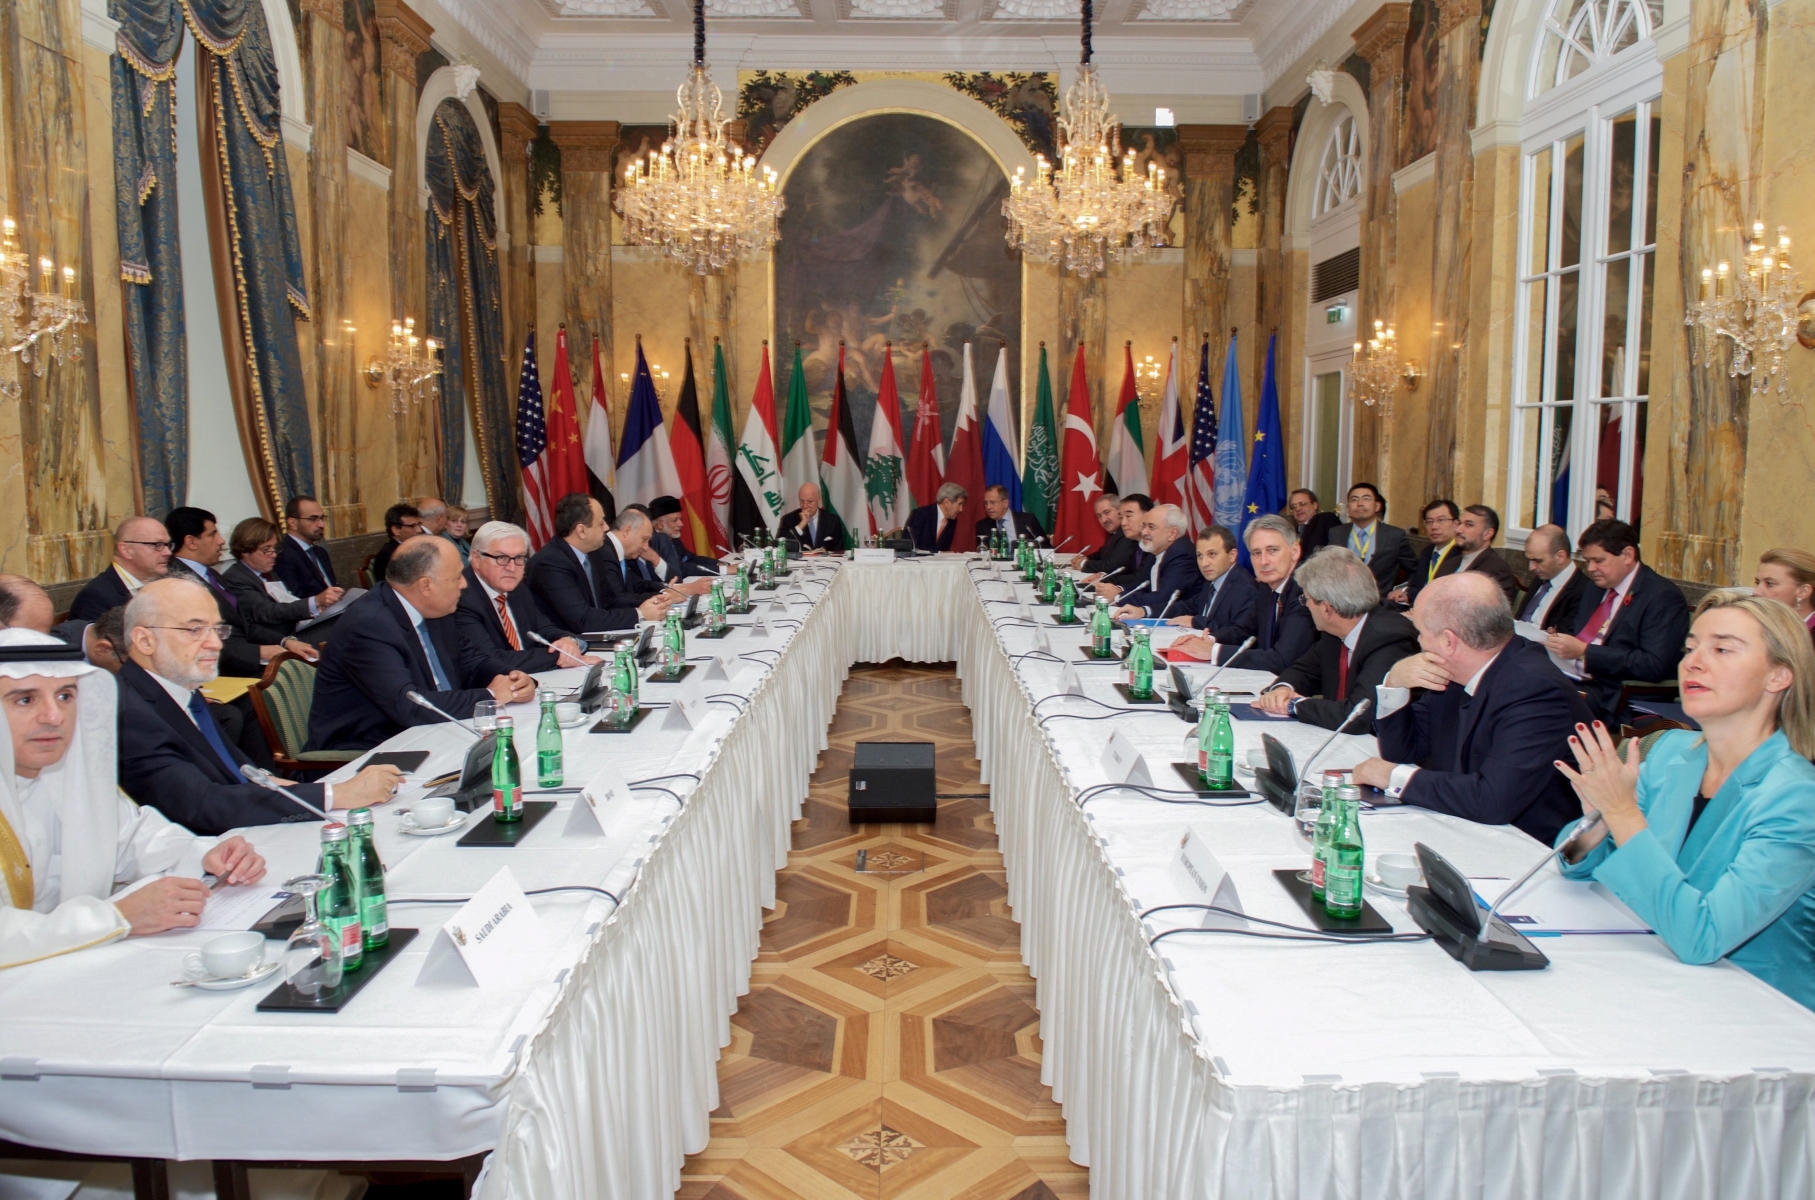 epa05003636 A handout photograph made avaiable by the US Department of State showing US Secretary of State John Kerry (C-R) sitting with his fellow Foreign Ministers at the Hotel Imperial in Vienna, Austria, 30 October 2015, prior to a group discussion about ways to stop the fighting in Syria. UN Syria envoy Staffan de Mistura said on 30 October 2015 that the peace negotiations in Vienna could offer a 'light at the end of the tunnel' in the war. Among the countries attending are Saudi Arabia, Turkey, Jordan, Egypt, the United Arab Emirates, Qatar, Iraq and Lebanon Germany, USA, Russia, Britain, France, Italy.  EPA/US DEPARTMENT OF STATE / HANDDOUT  HANDOUT EDITORIAL USE ONLY/NO SALES